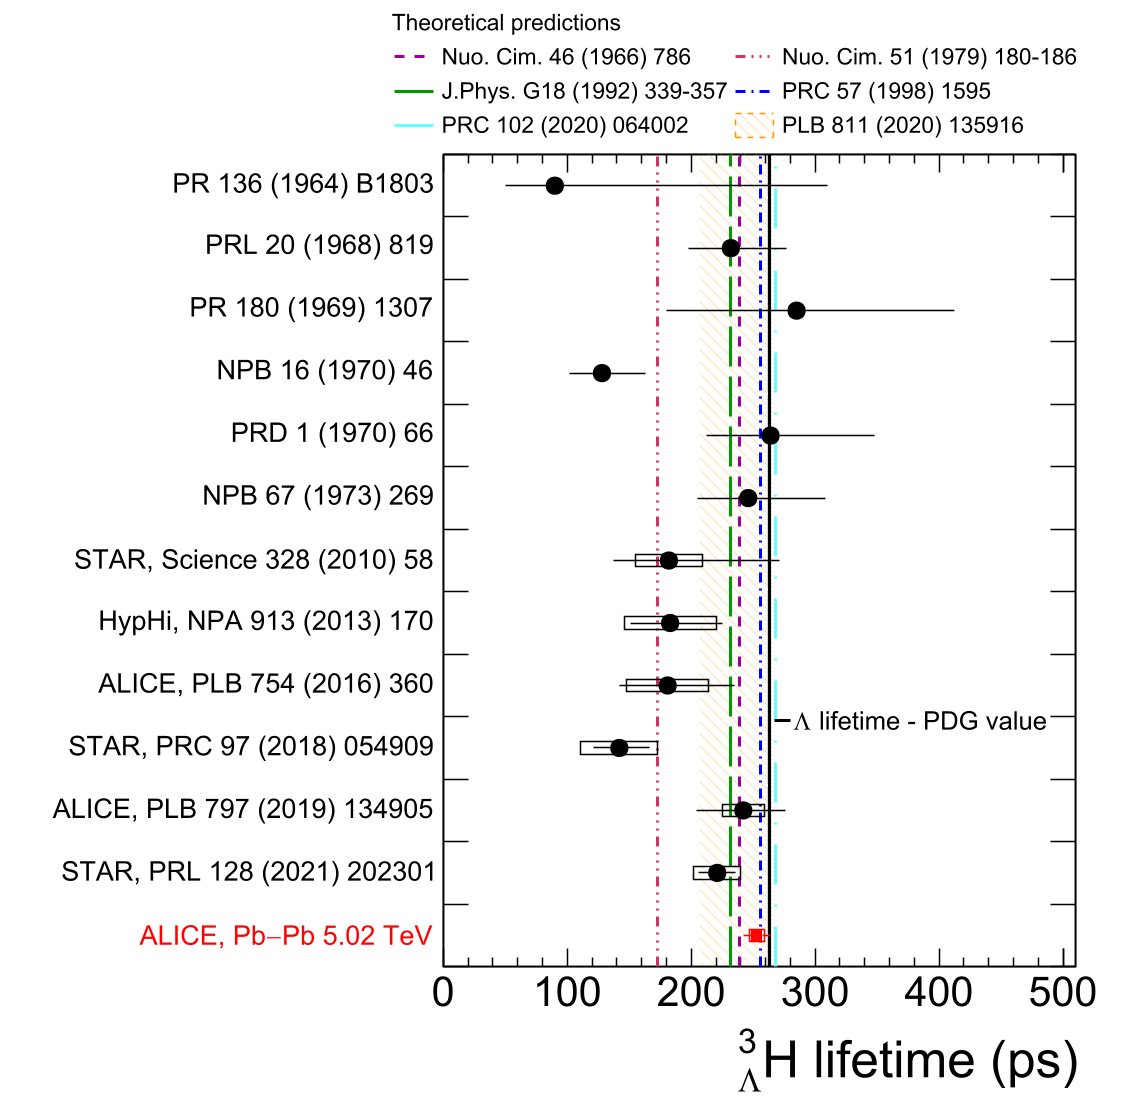 Measurements of the hypertriton’s lifetime performed with different techniques over time, including ALICE’s new measurement (red). The horizontal lines and boxes denote the statistical and systematic uncertainties, respectively. The dashed-dotted lines represent different theoretical predictions. (Image: ALICE collaboration)